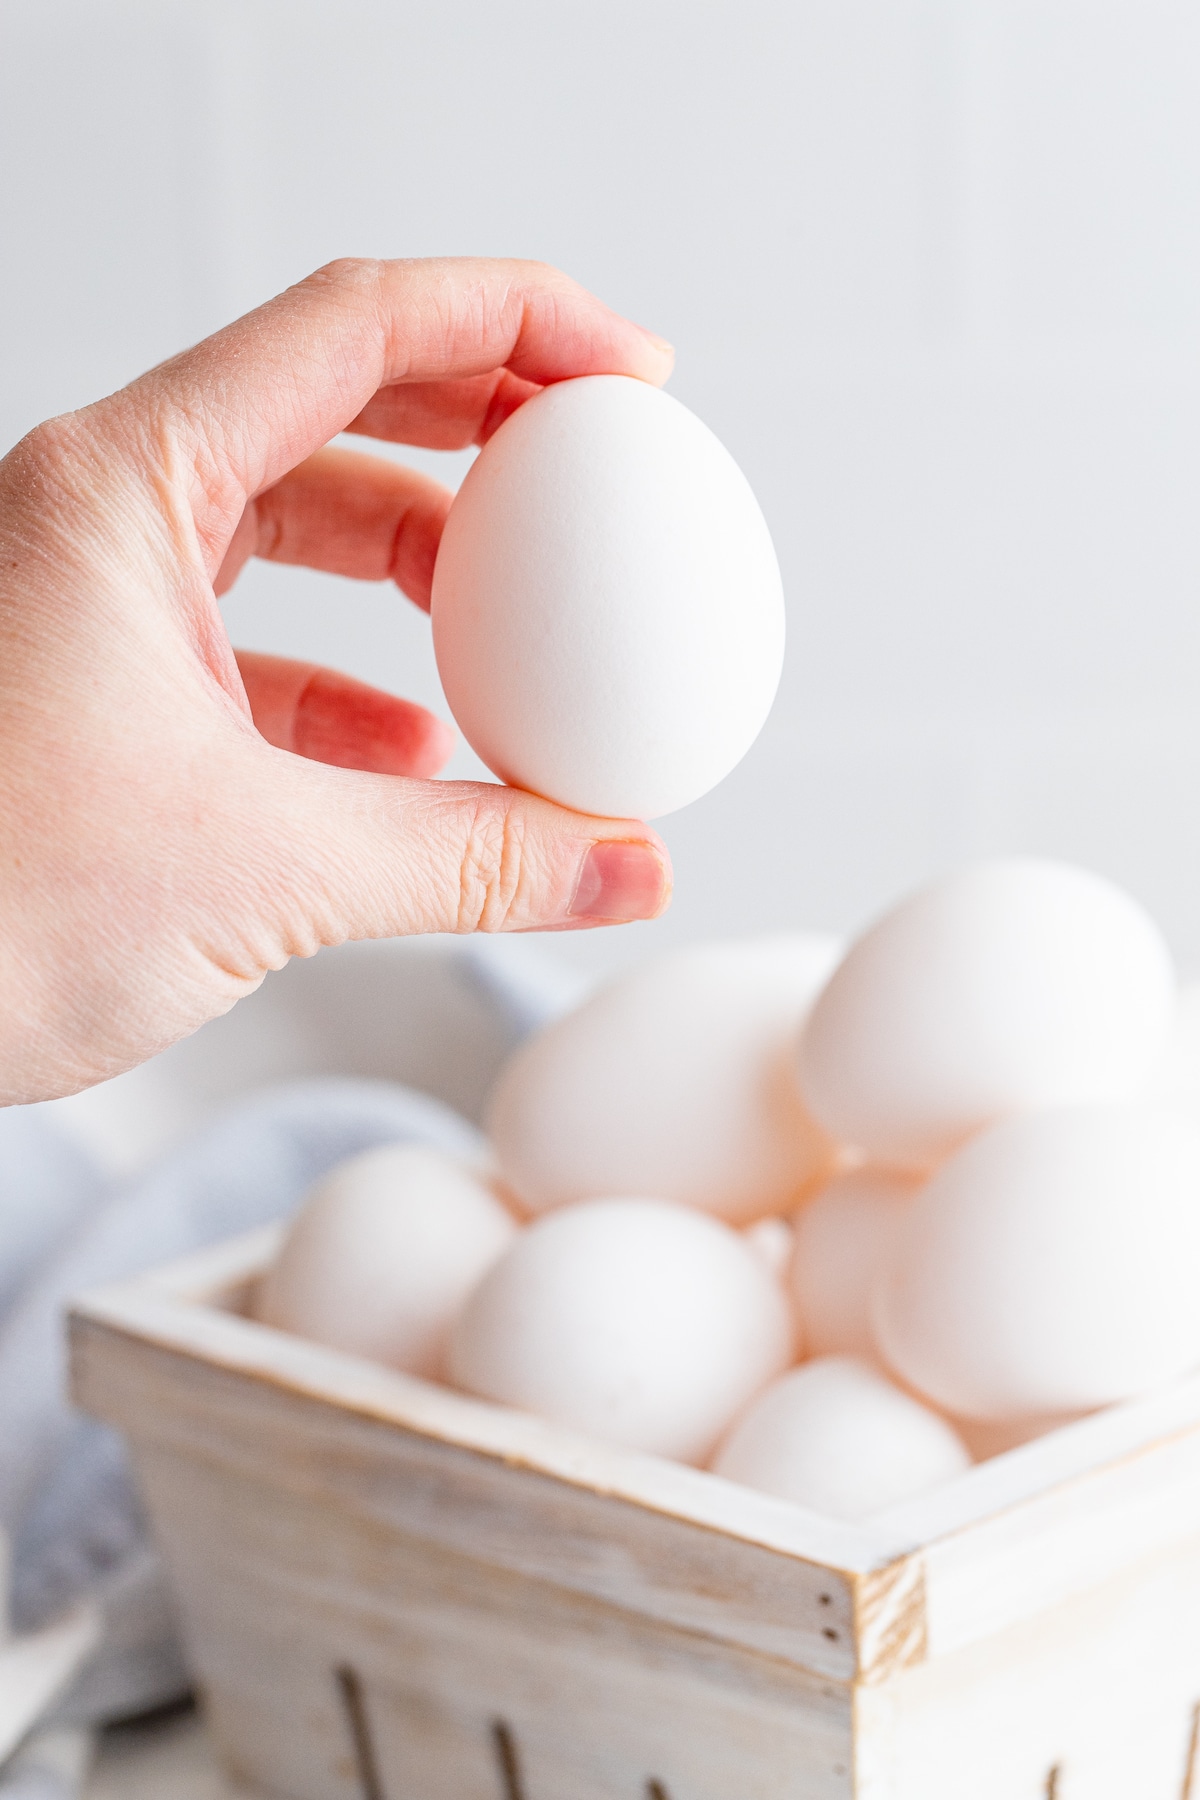 Hand holding up one egg with more in a basket below it